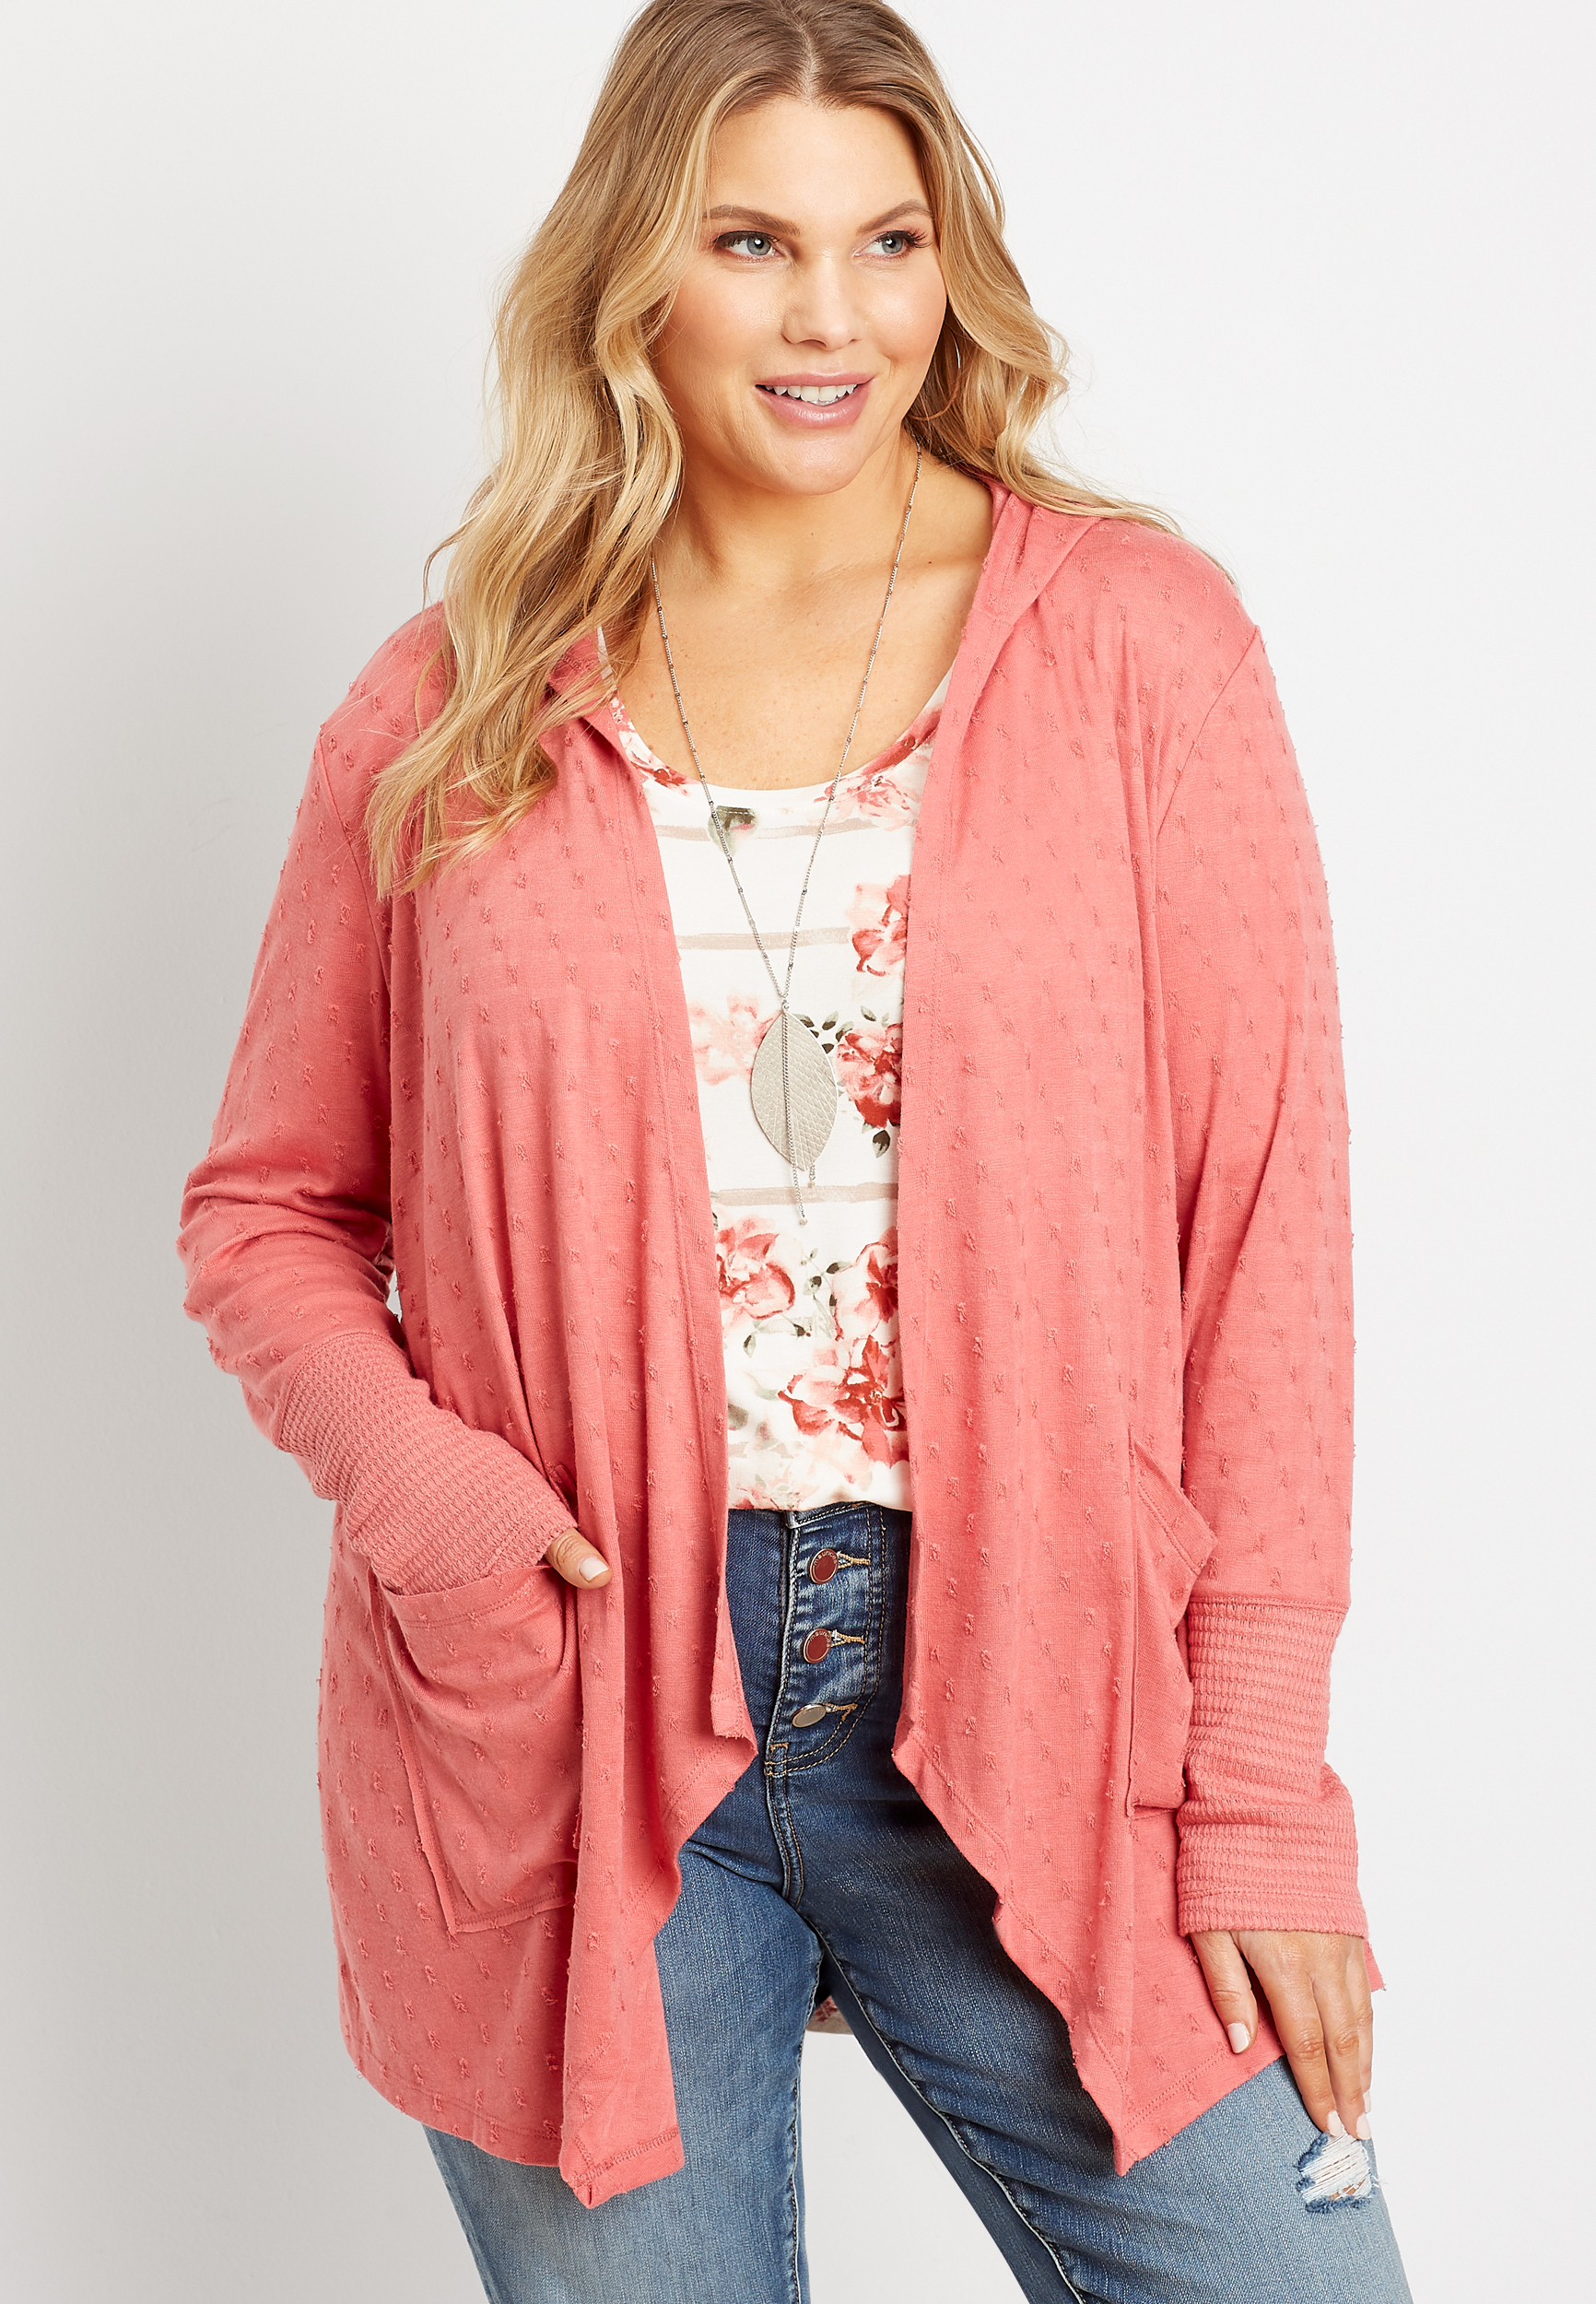 Plus Size Hooded | maurices